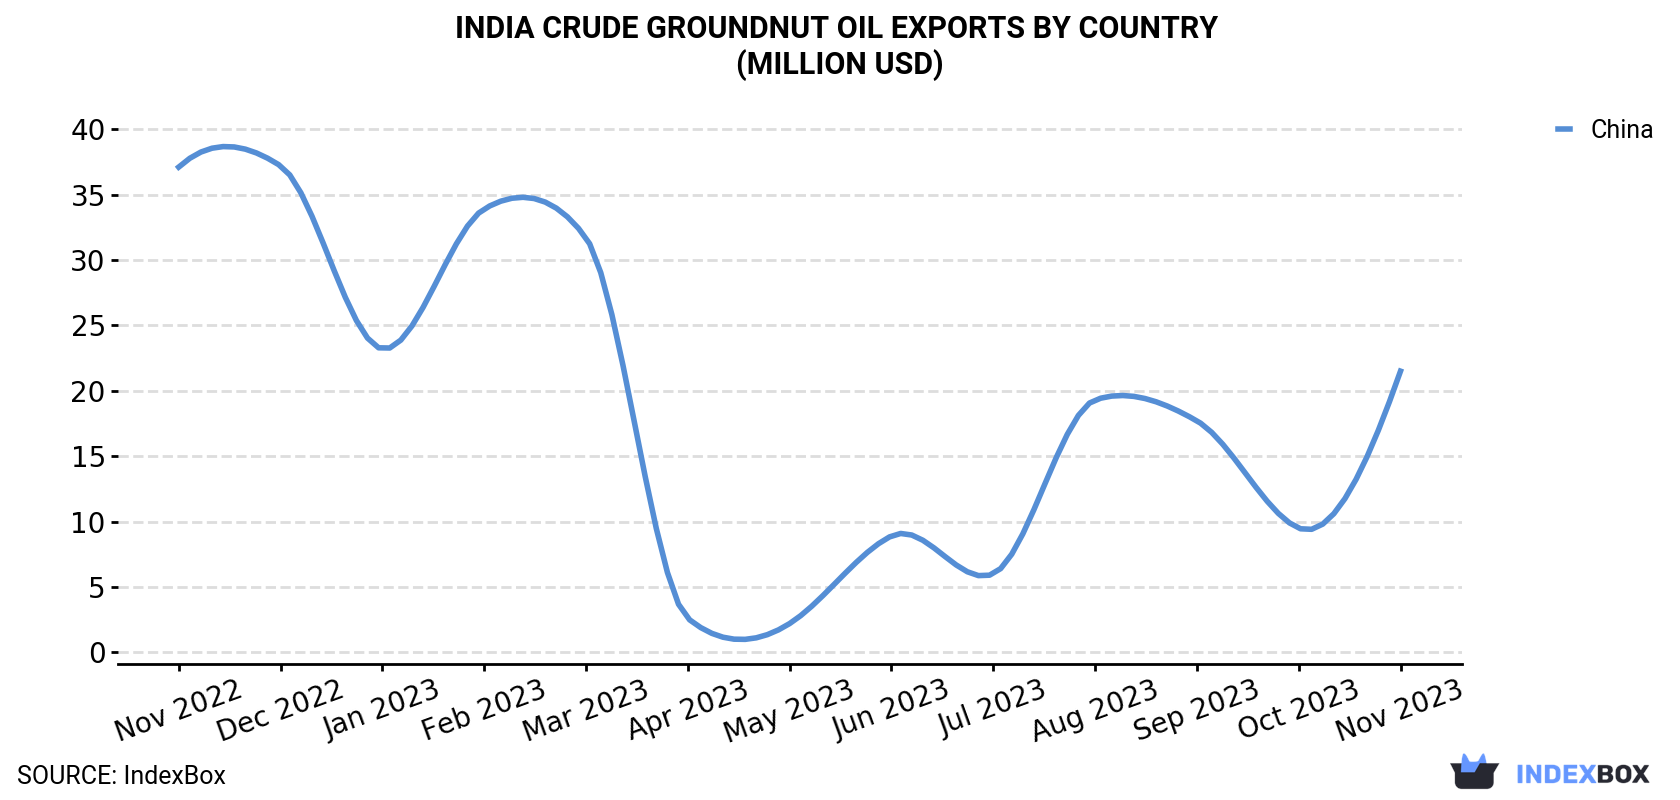 India Crude Groundnut Oil Exports By Country (Million USD)